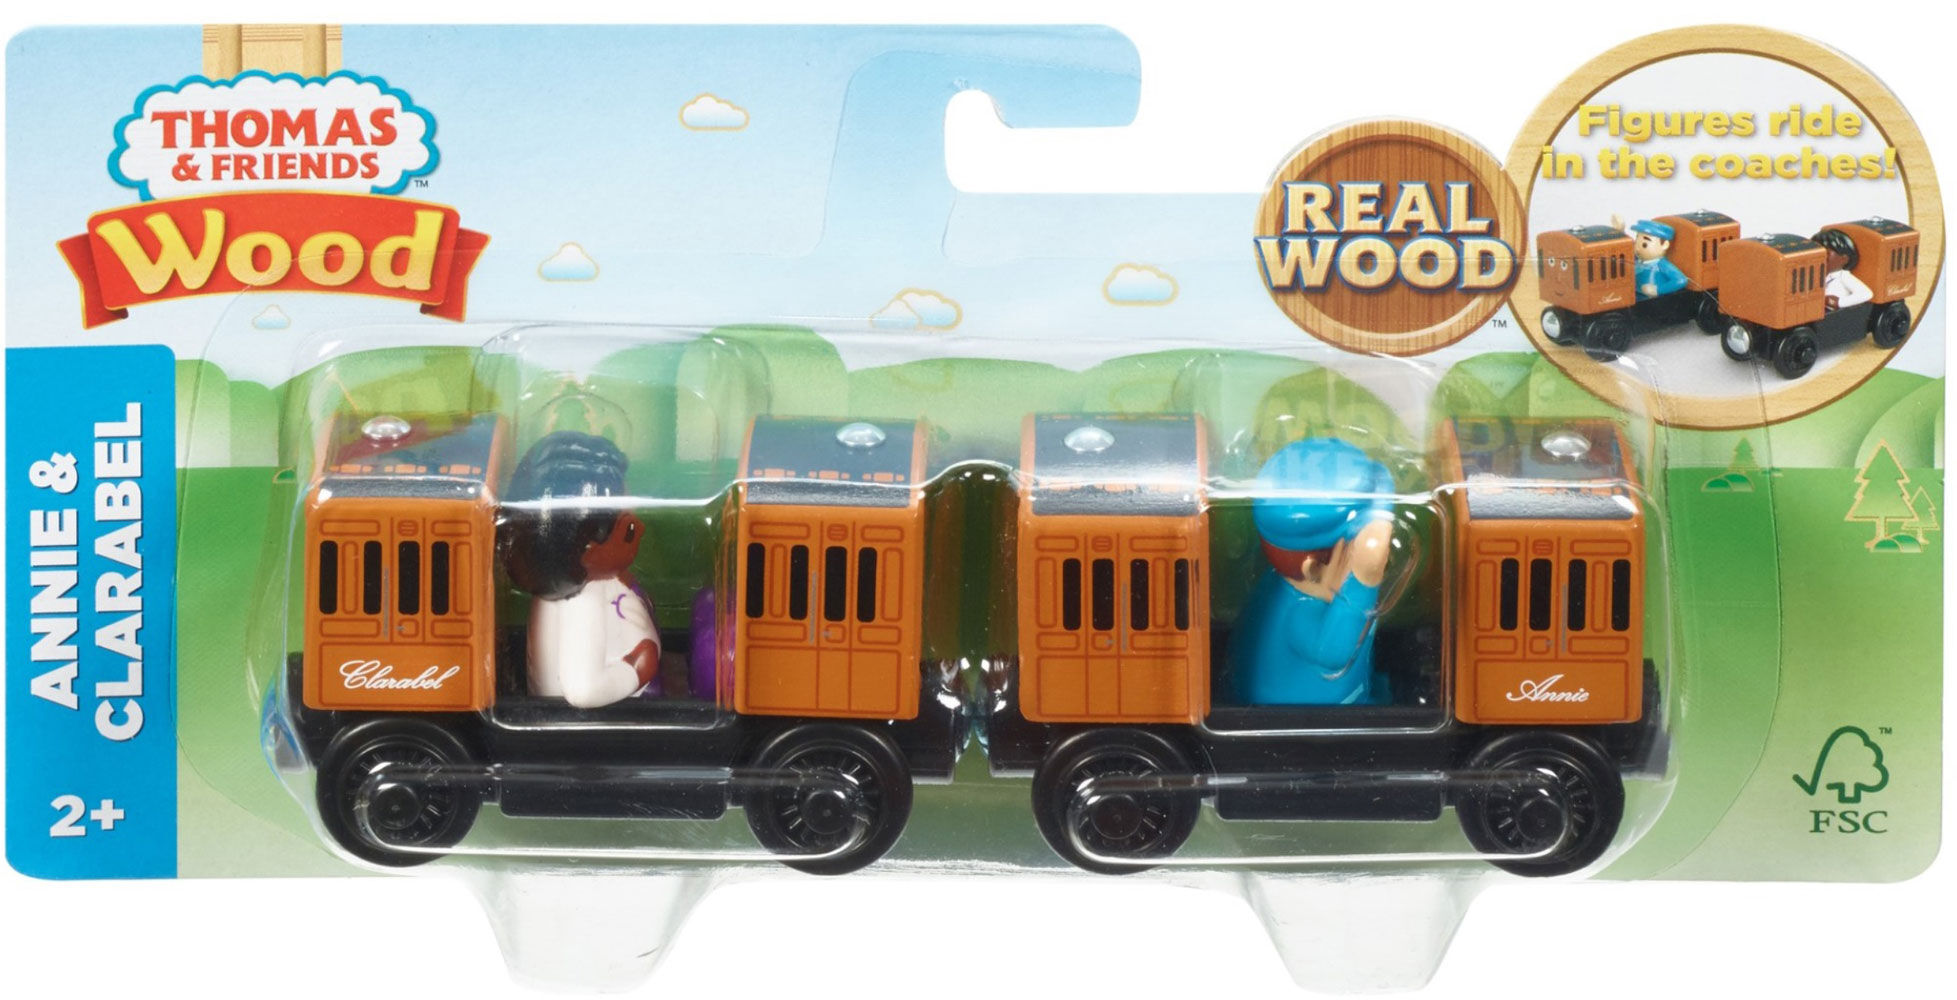 thomas and friends wooden railway annie and clarabel